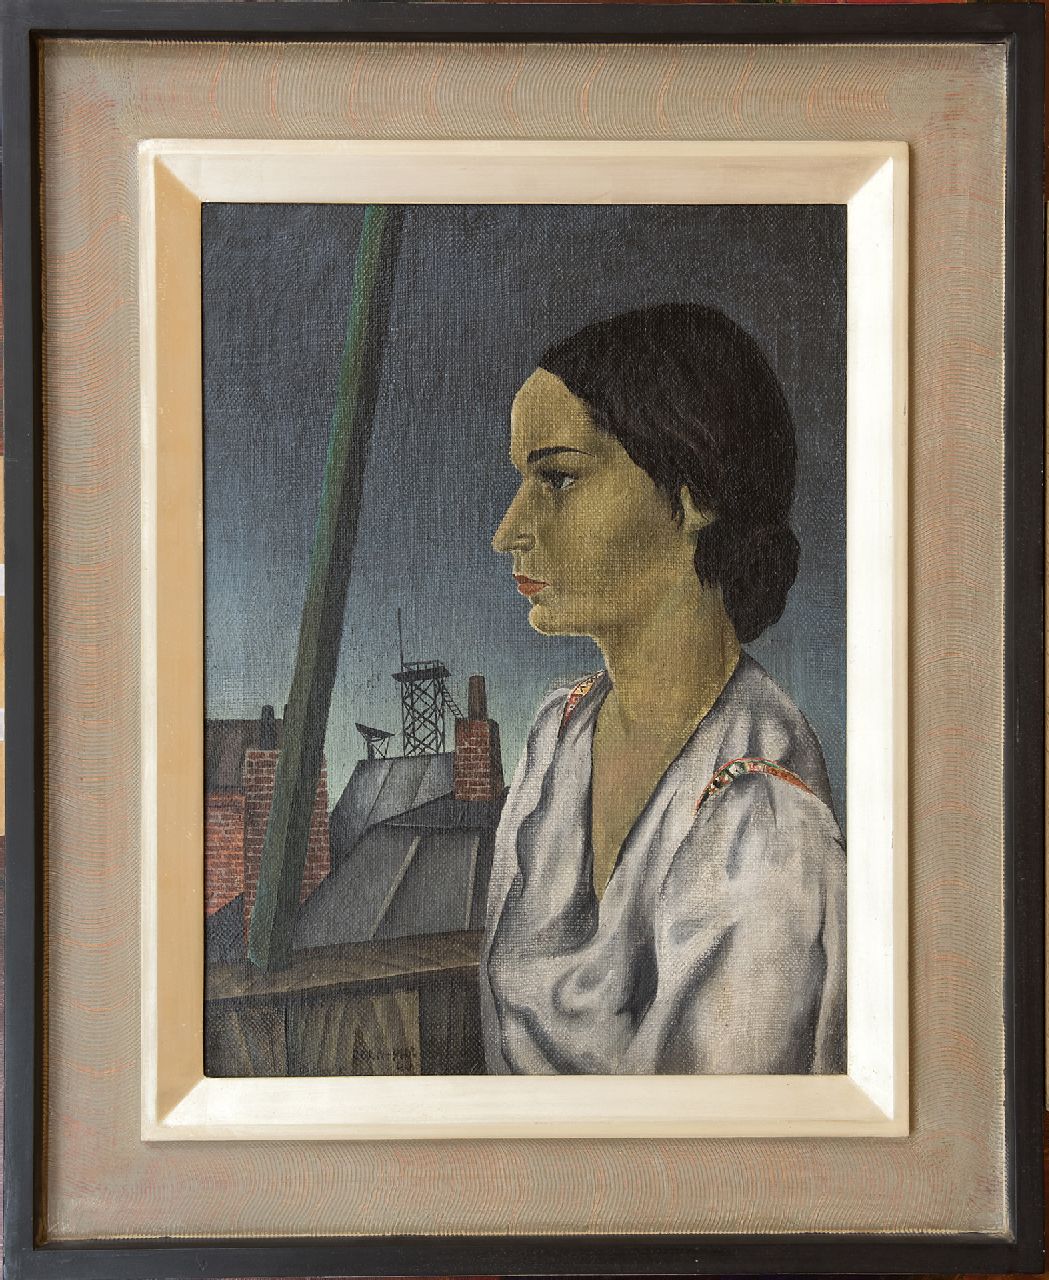 Vroom J.P.  | Johannes Paul Vroom, Portrait of my third wife, oil on canvas 59.8 x 45.3 cm, signed l.c. and painted '40